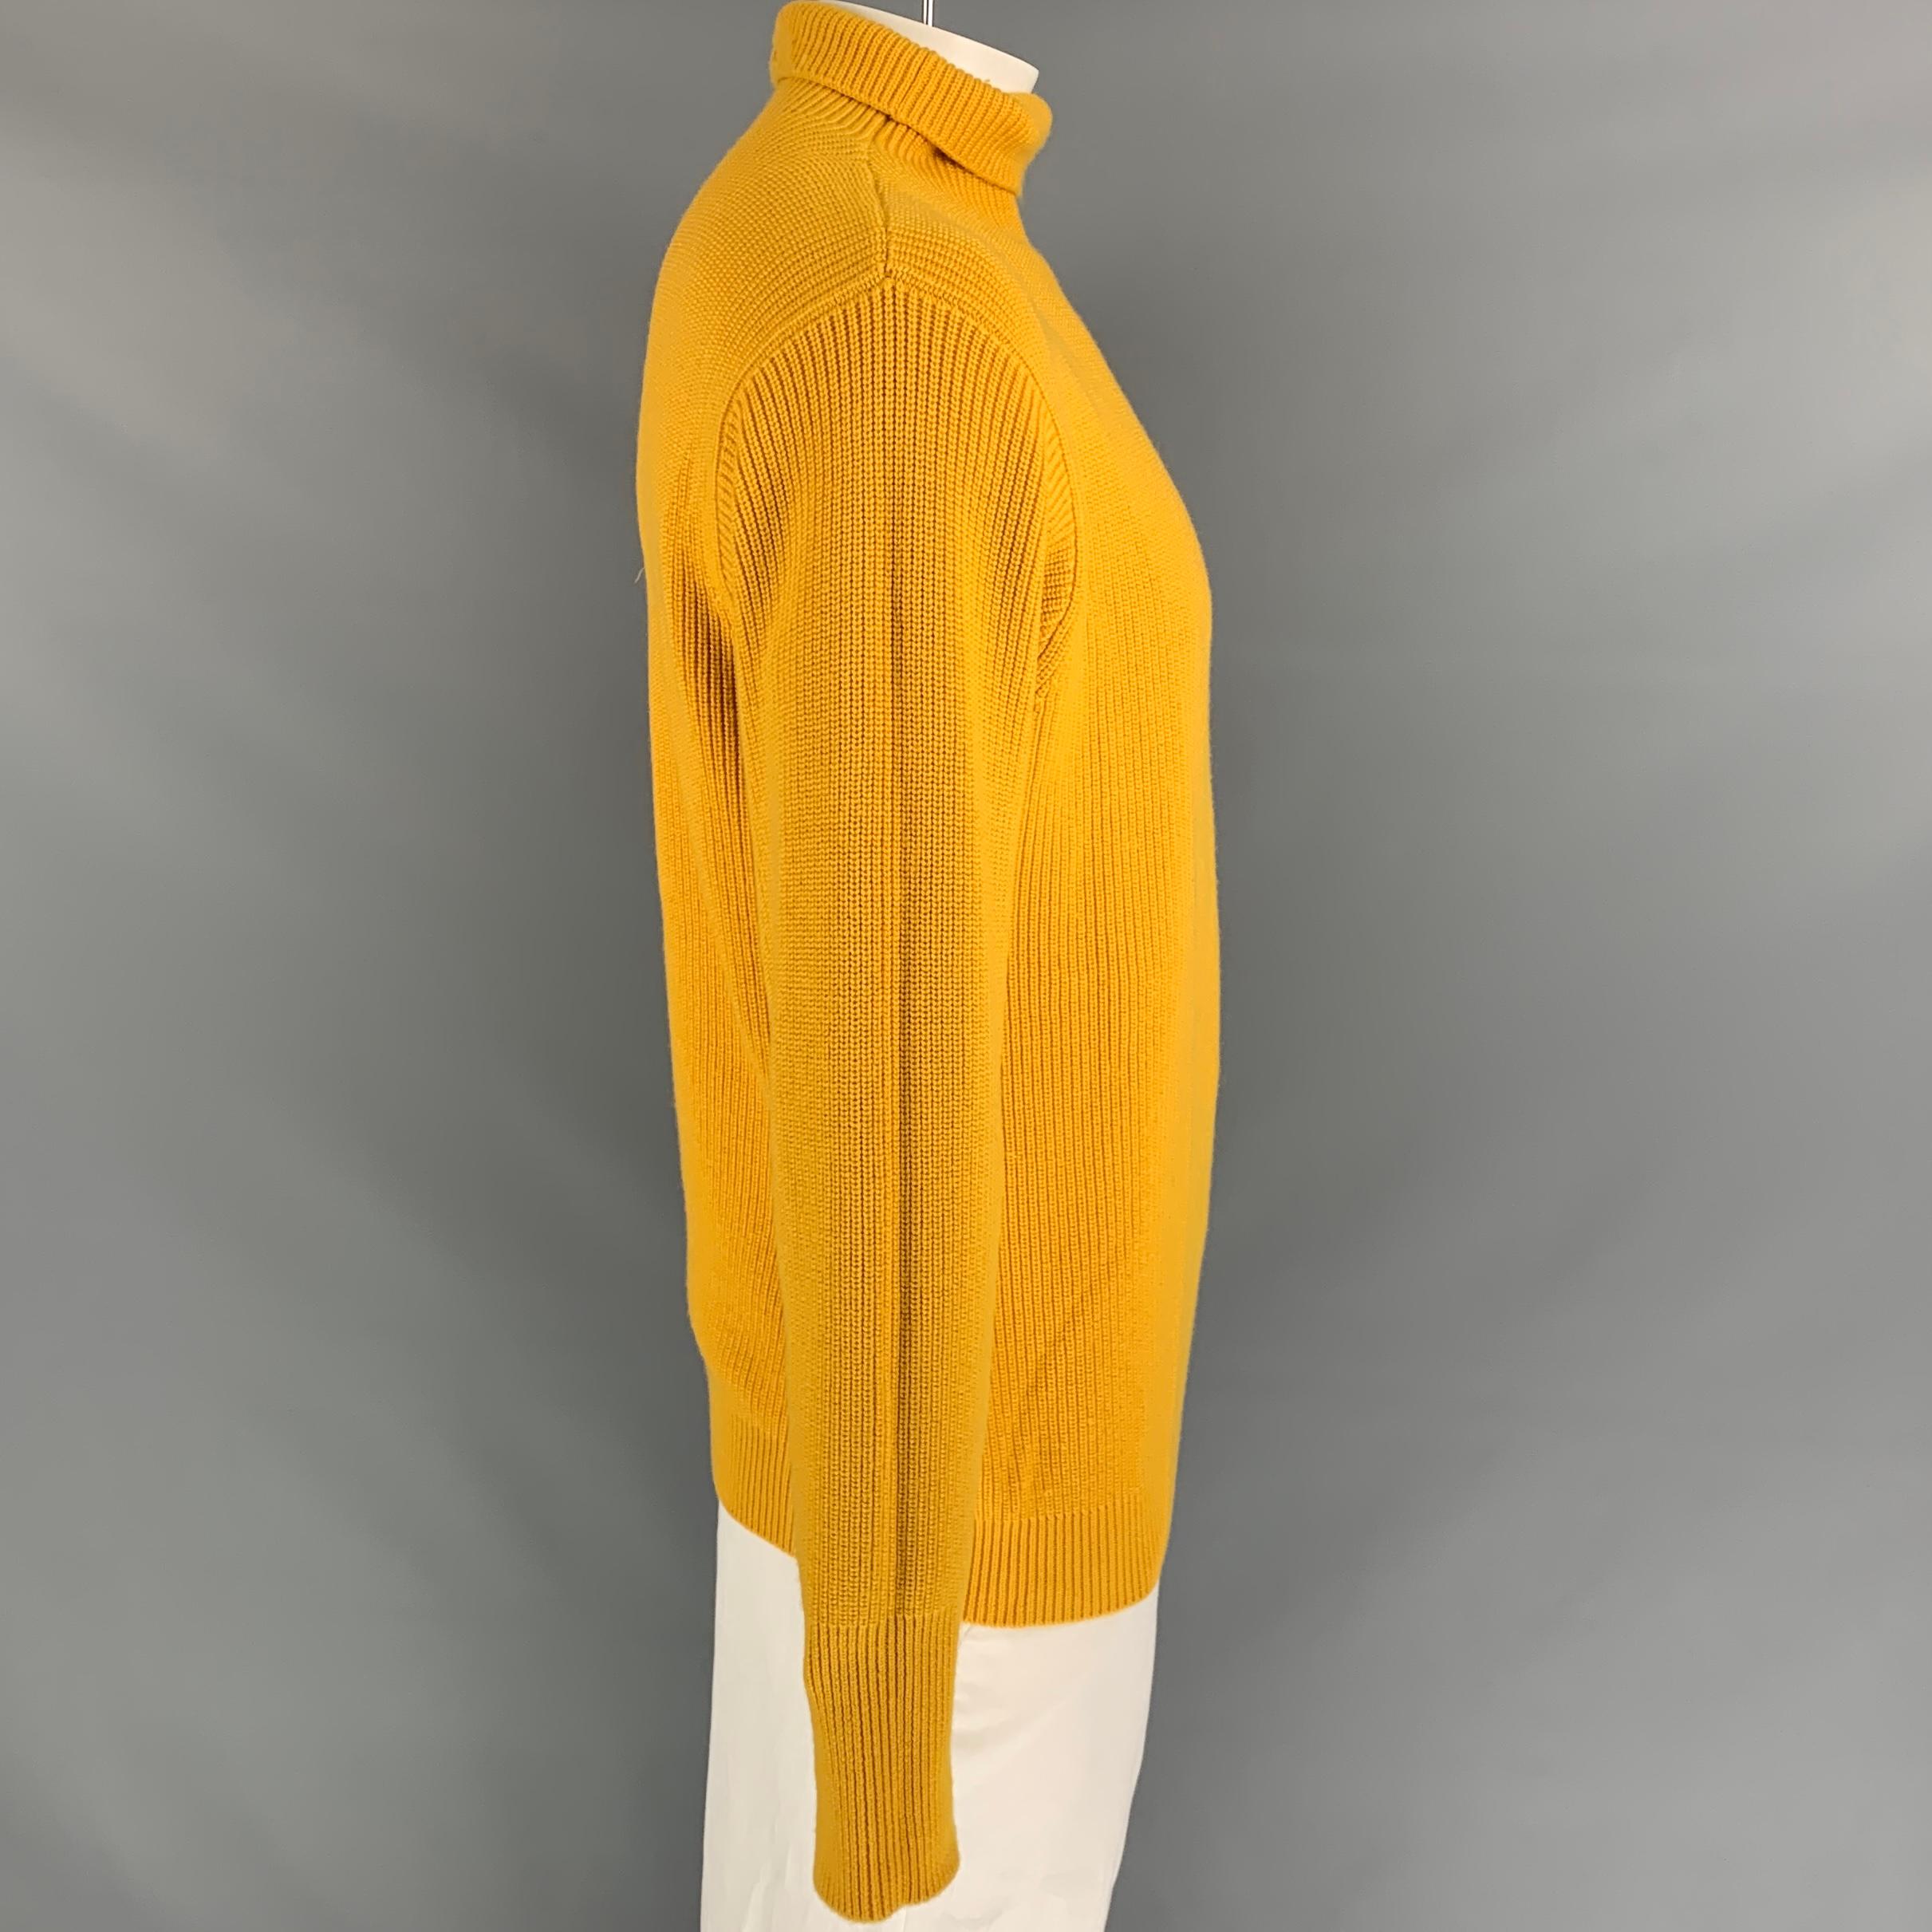 BARENA sweater comes in a yellow knitted wool featuring a long sleeves, thumb holes, and a turtleneck. Made in Italy.

Very Good Pre-Owned Condition.
Marked: XXL

Measurements:

Shoulder: 21 in.
Chest: 44 in.
Sleeve: 27 in.
Length: 28 in. 